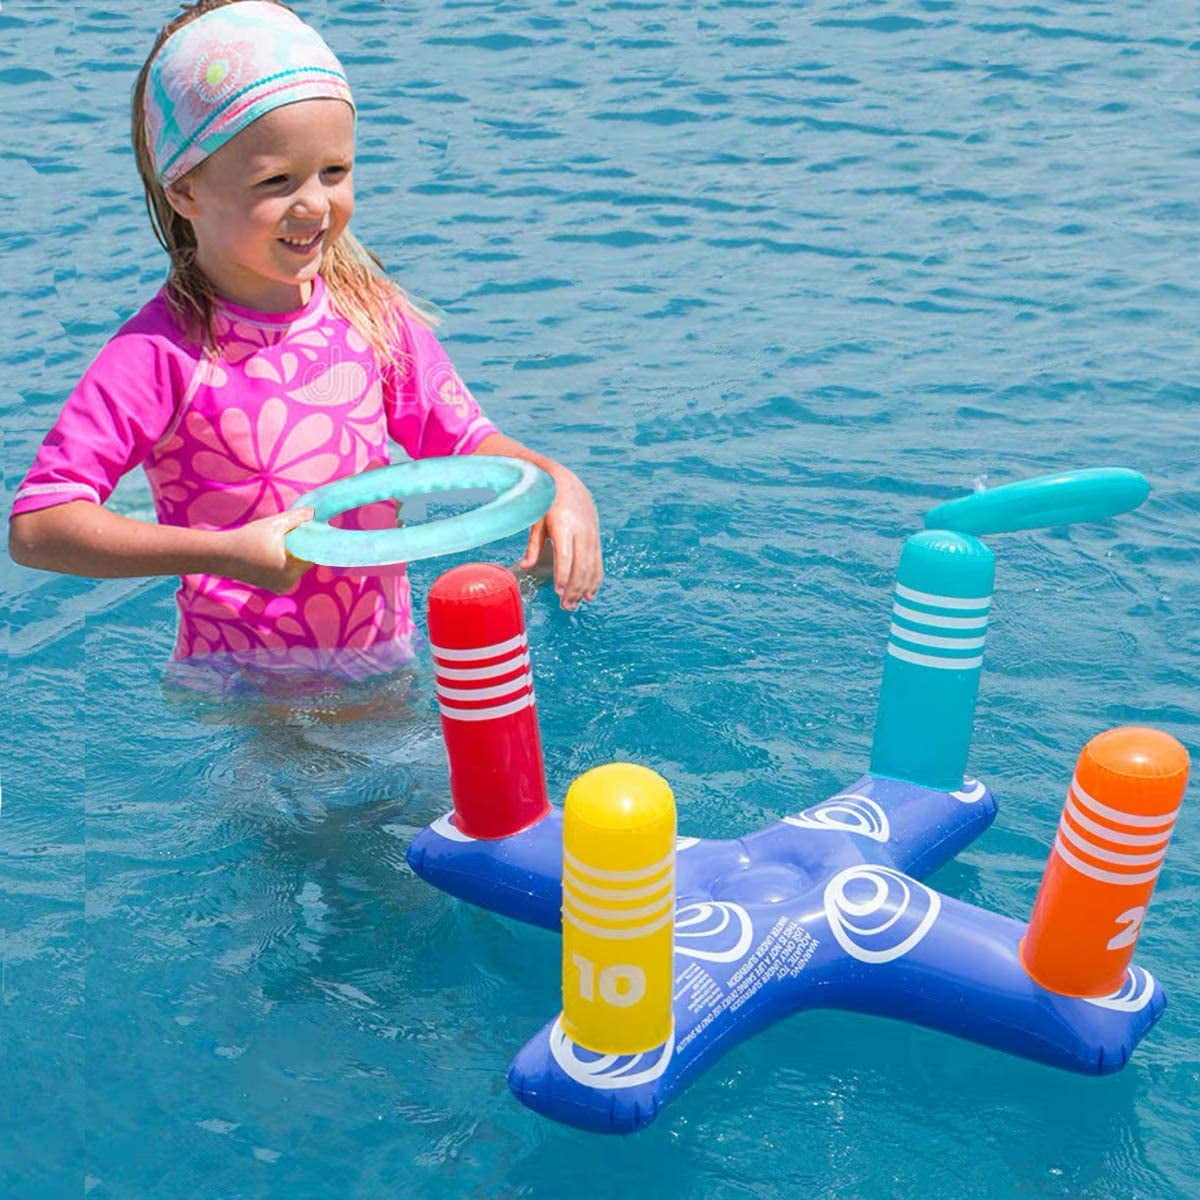 Balacoo Inflatable Swimming Rings Rainbow Swim Tube for Kids Seat Ring for Children Summer Beach Floaty Toys